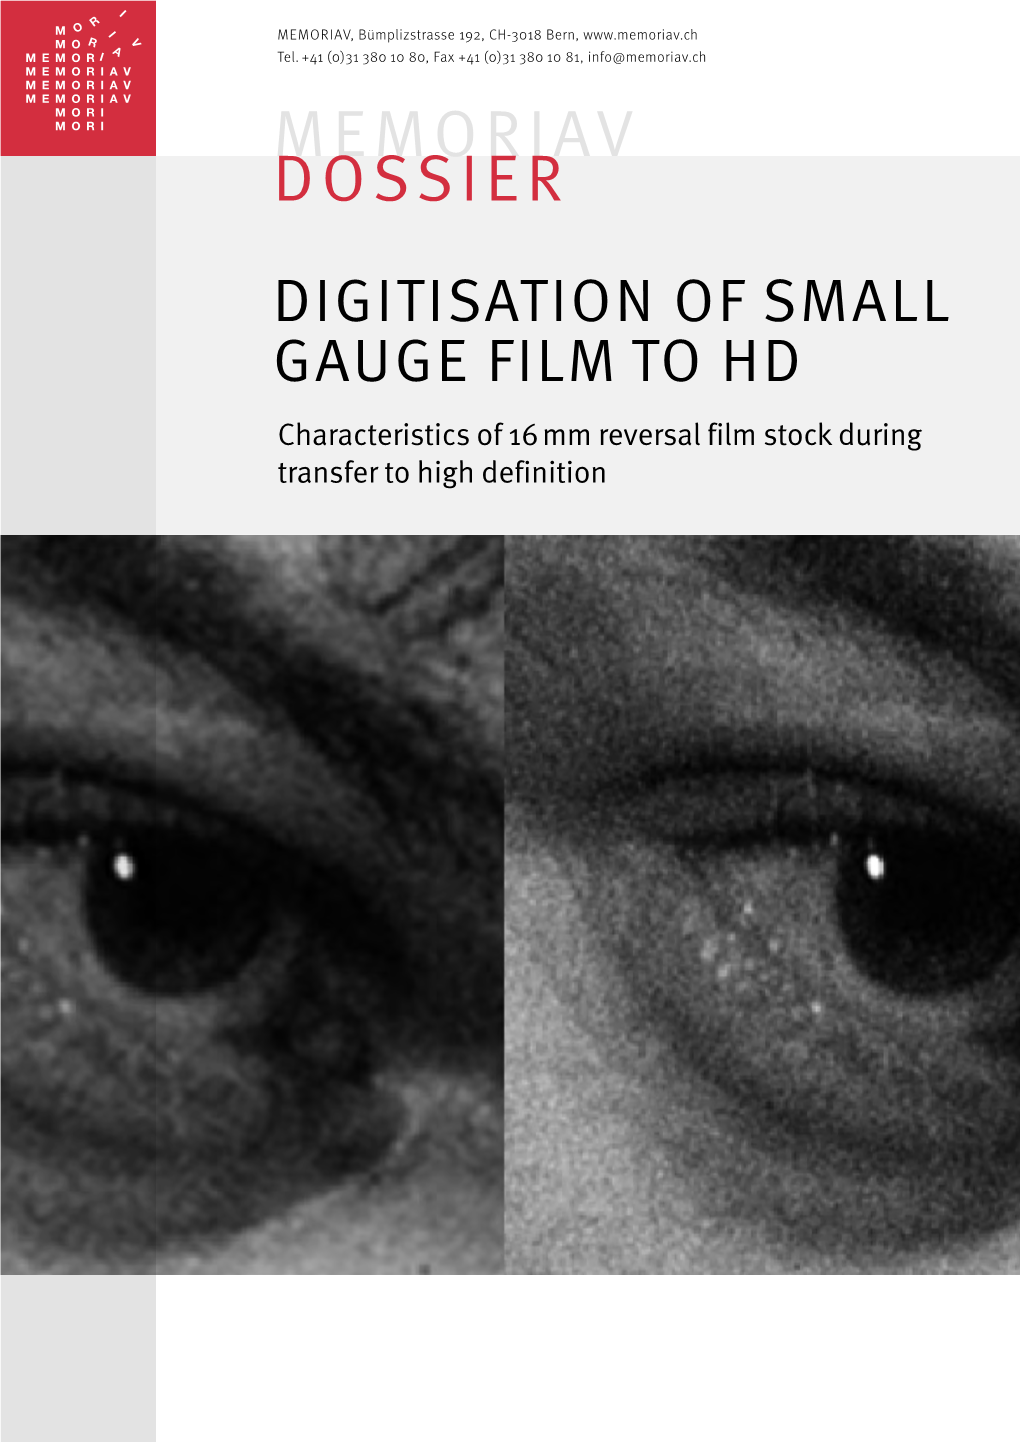 Memoriav Dossier DIGITISATION of SMALL GAUGE FILM to HD Characteristics of 16 Mm Reversal Film Stock During Transfer to High Definition Contents